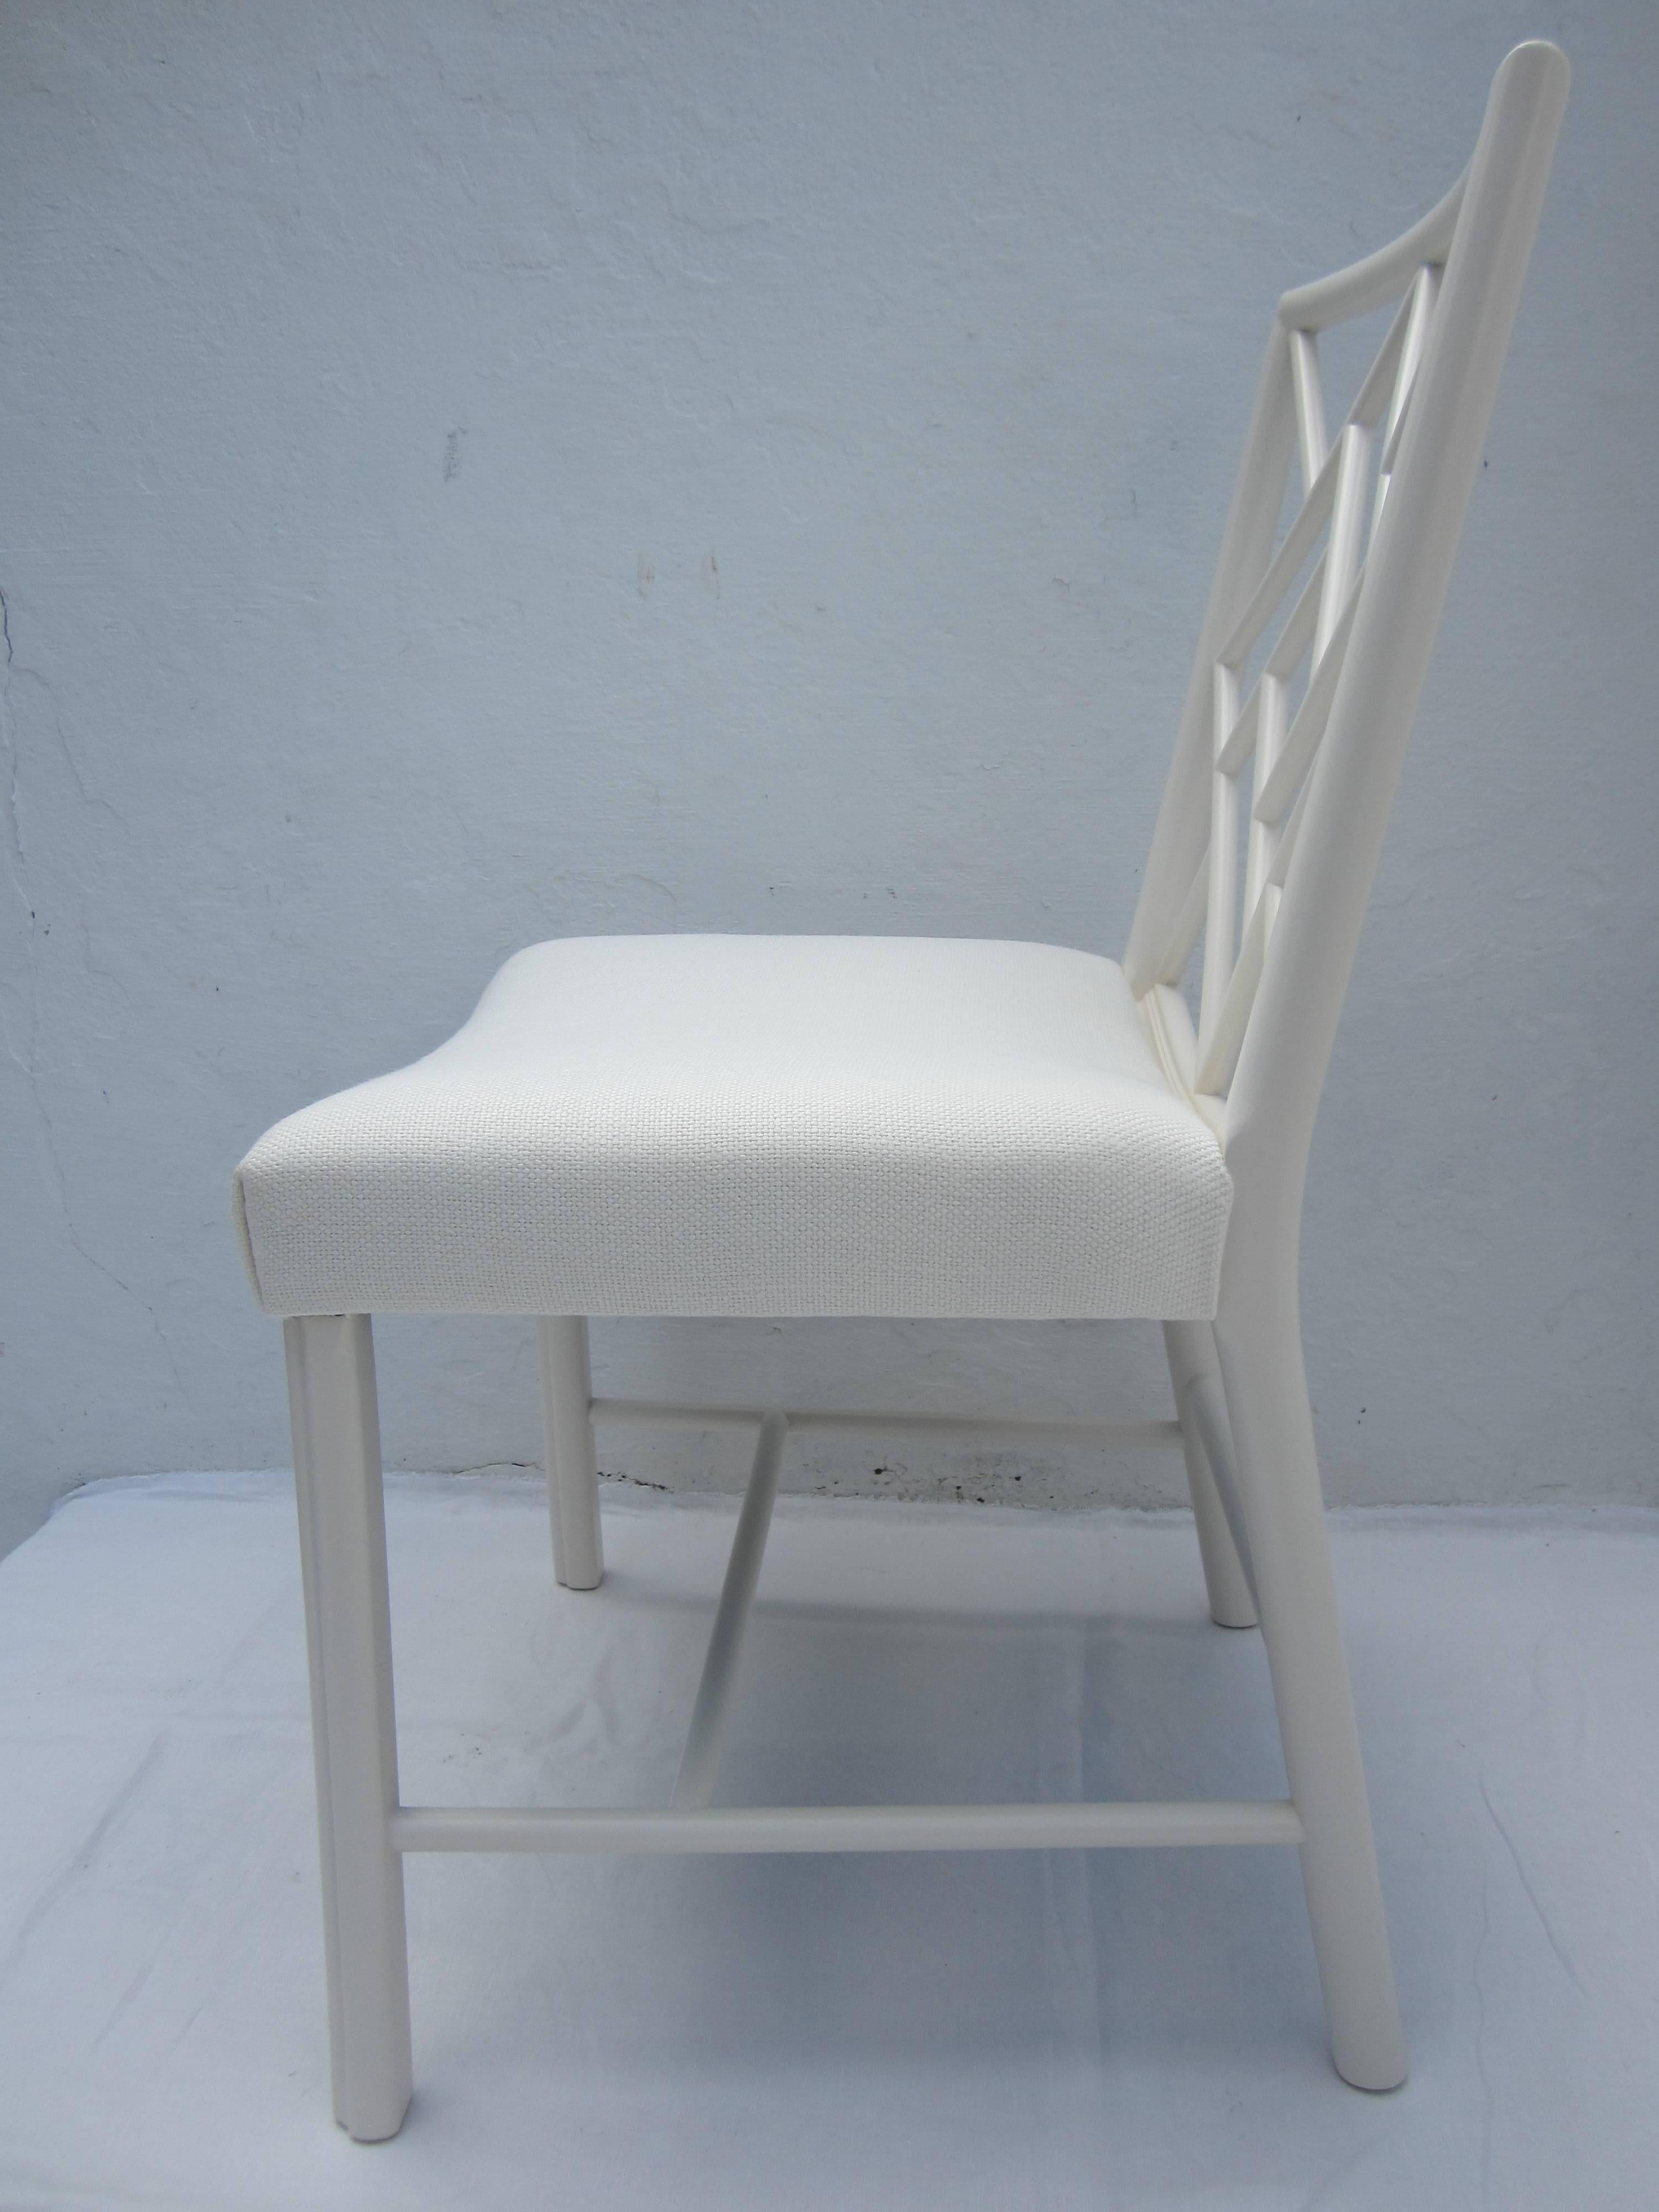 Set of eight Chinese Chippendale dining chairs with lattice back. Painted in off-white Farrow and Ball, color "Clunch." Only one chair is upholstered in fabric shown on picture. The remaining seven chairs are upholstered in muslin.